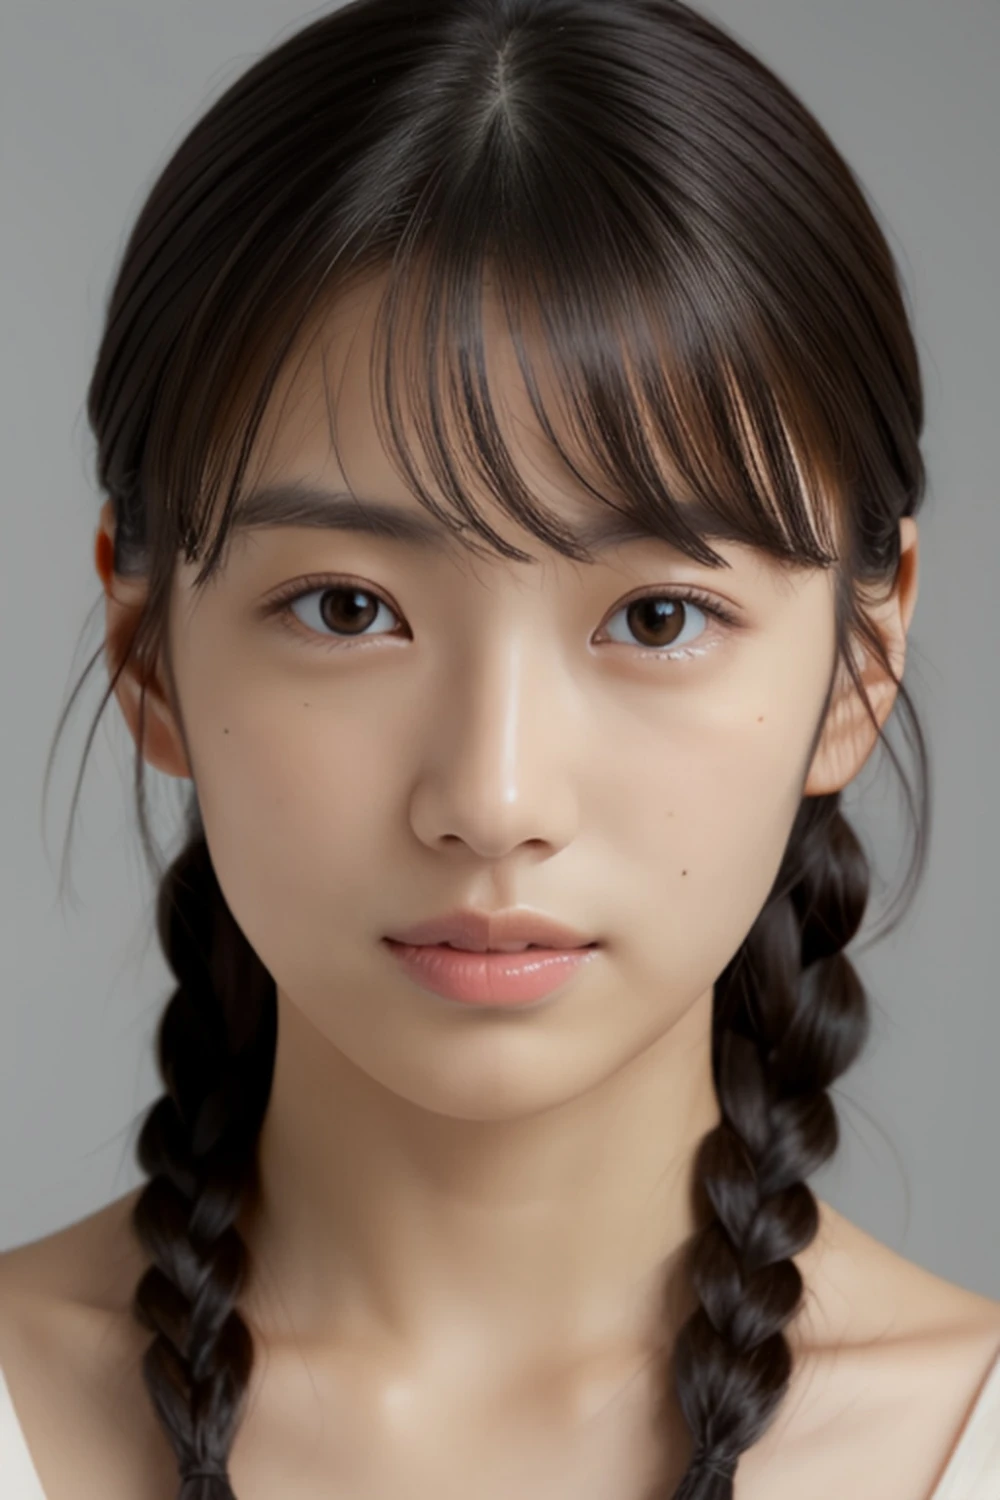 braid-realistic-style-all-ages-48